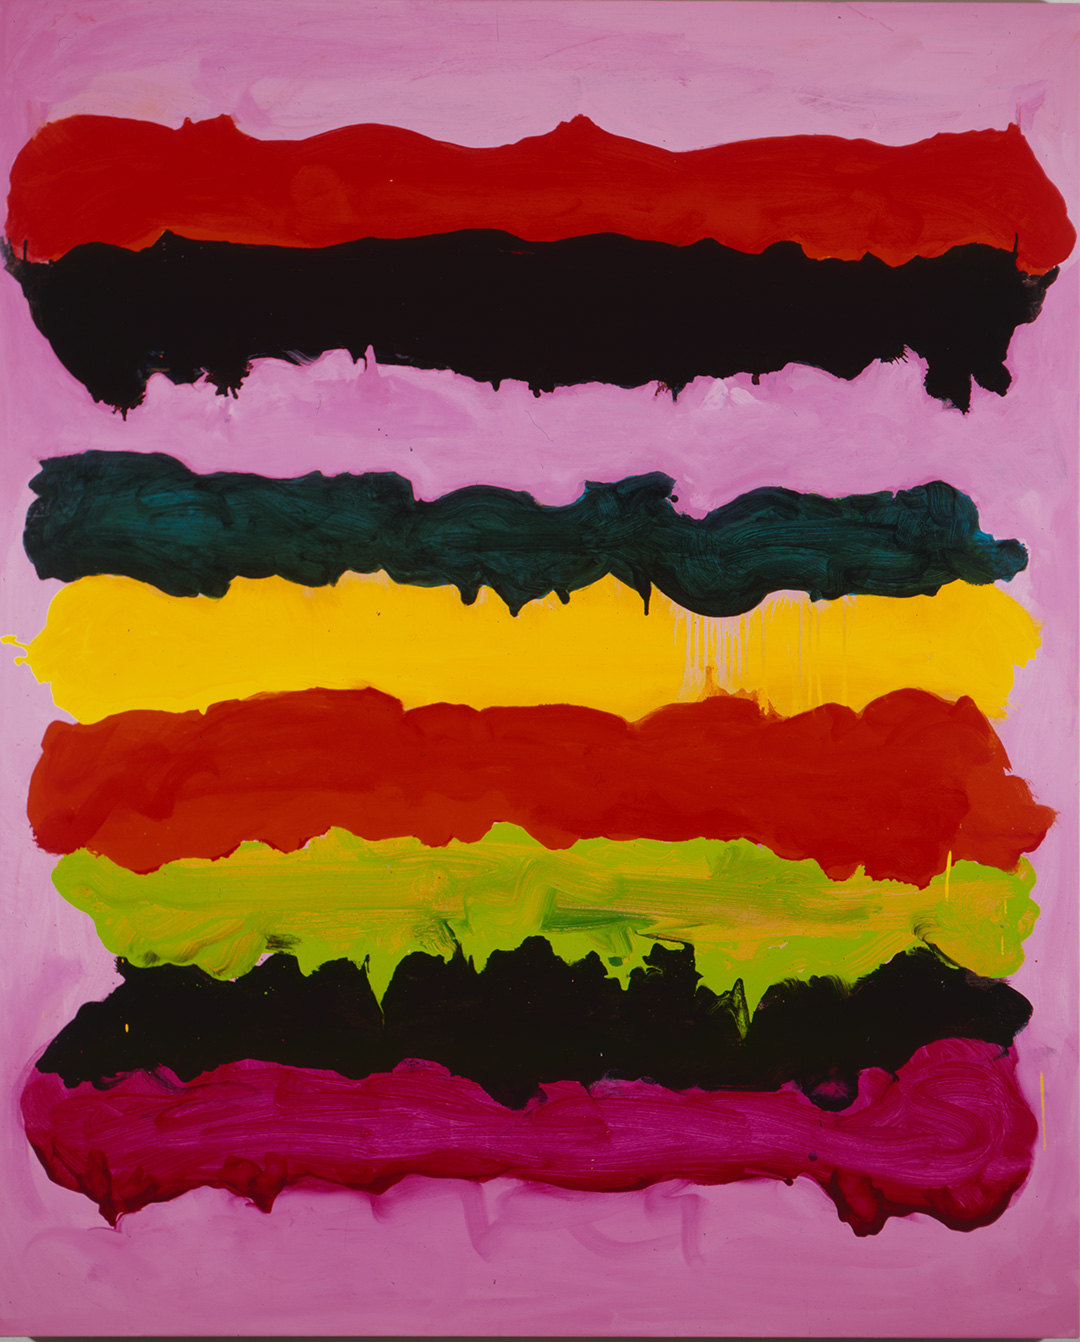 Image of artwork Surfing on Acid by Mary Heilmann